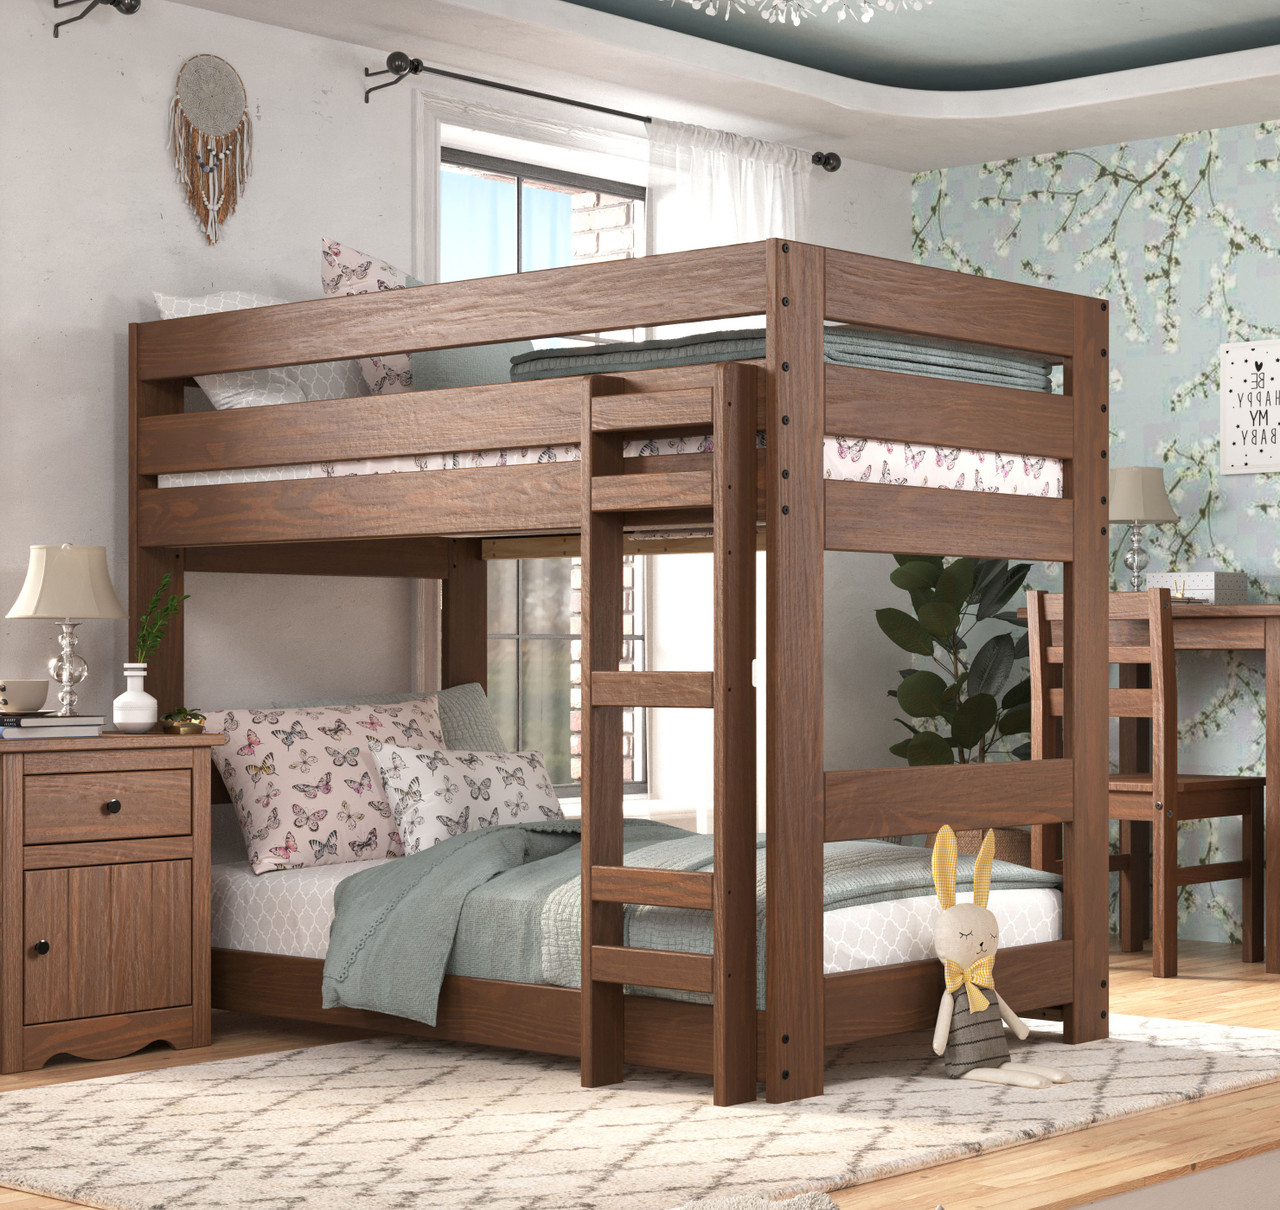 Twin XL Bunk Bed - Farmhouse Style